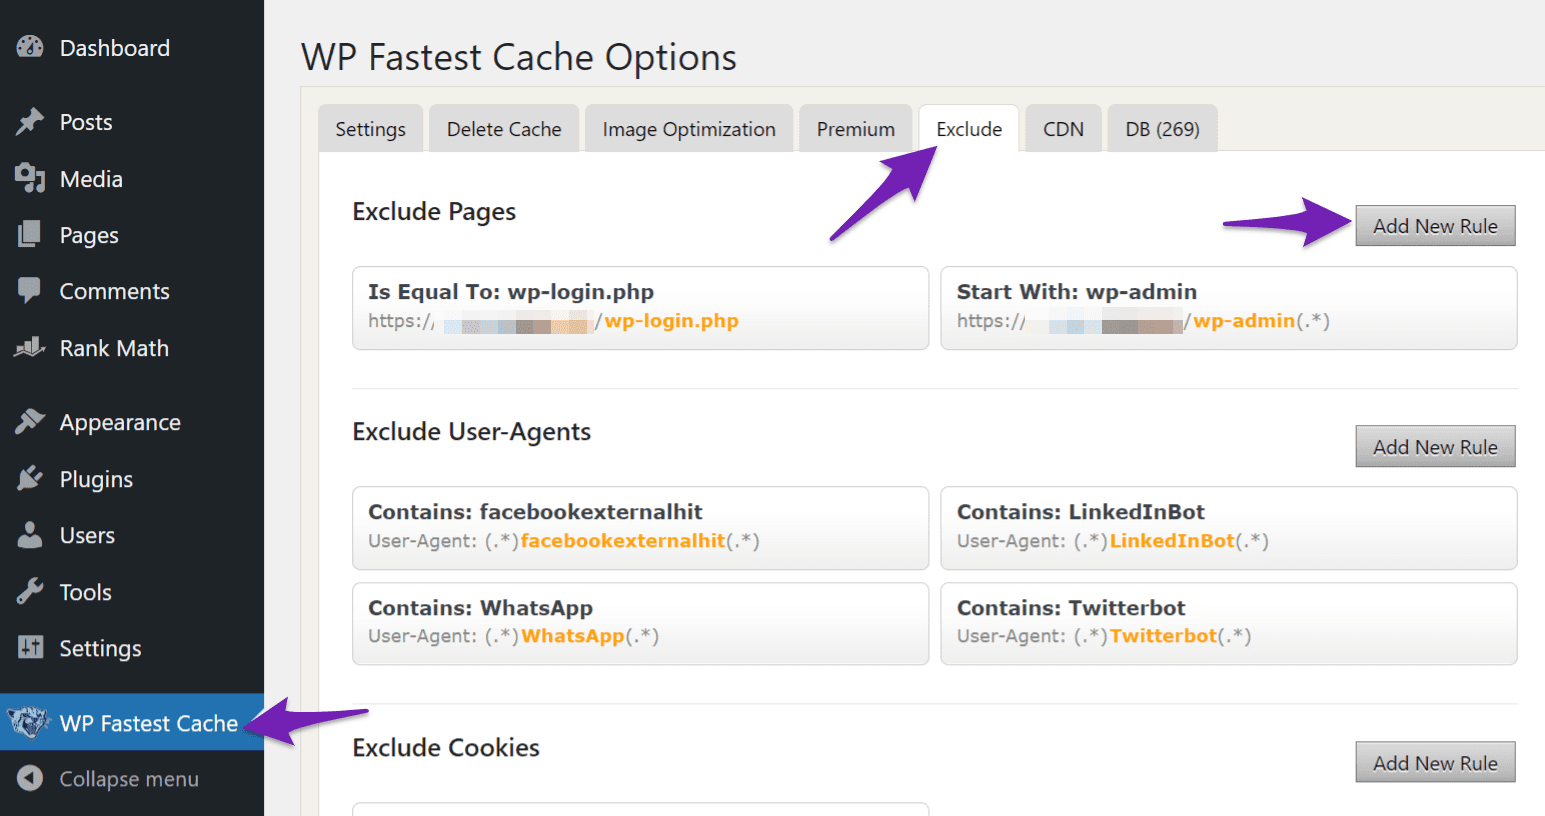 Navigate to Excludes in WP Fastest Cache